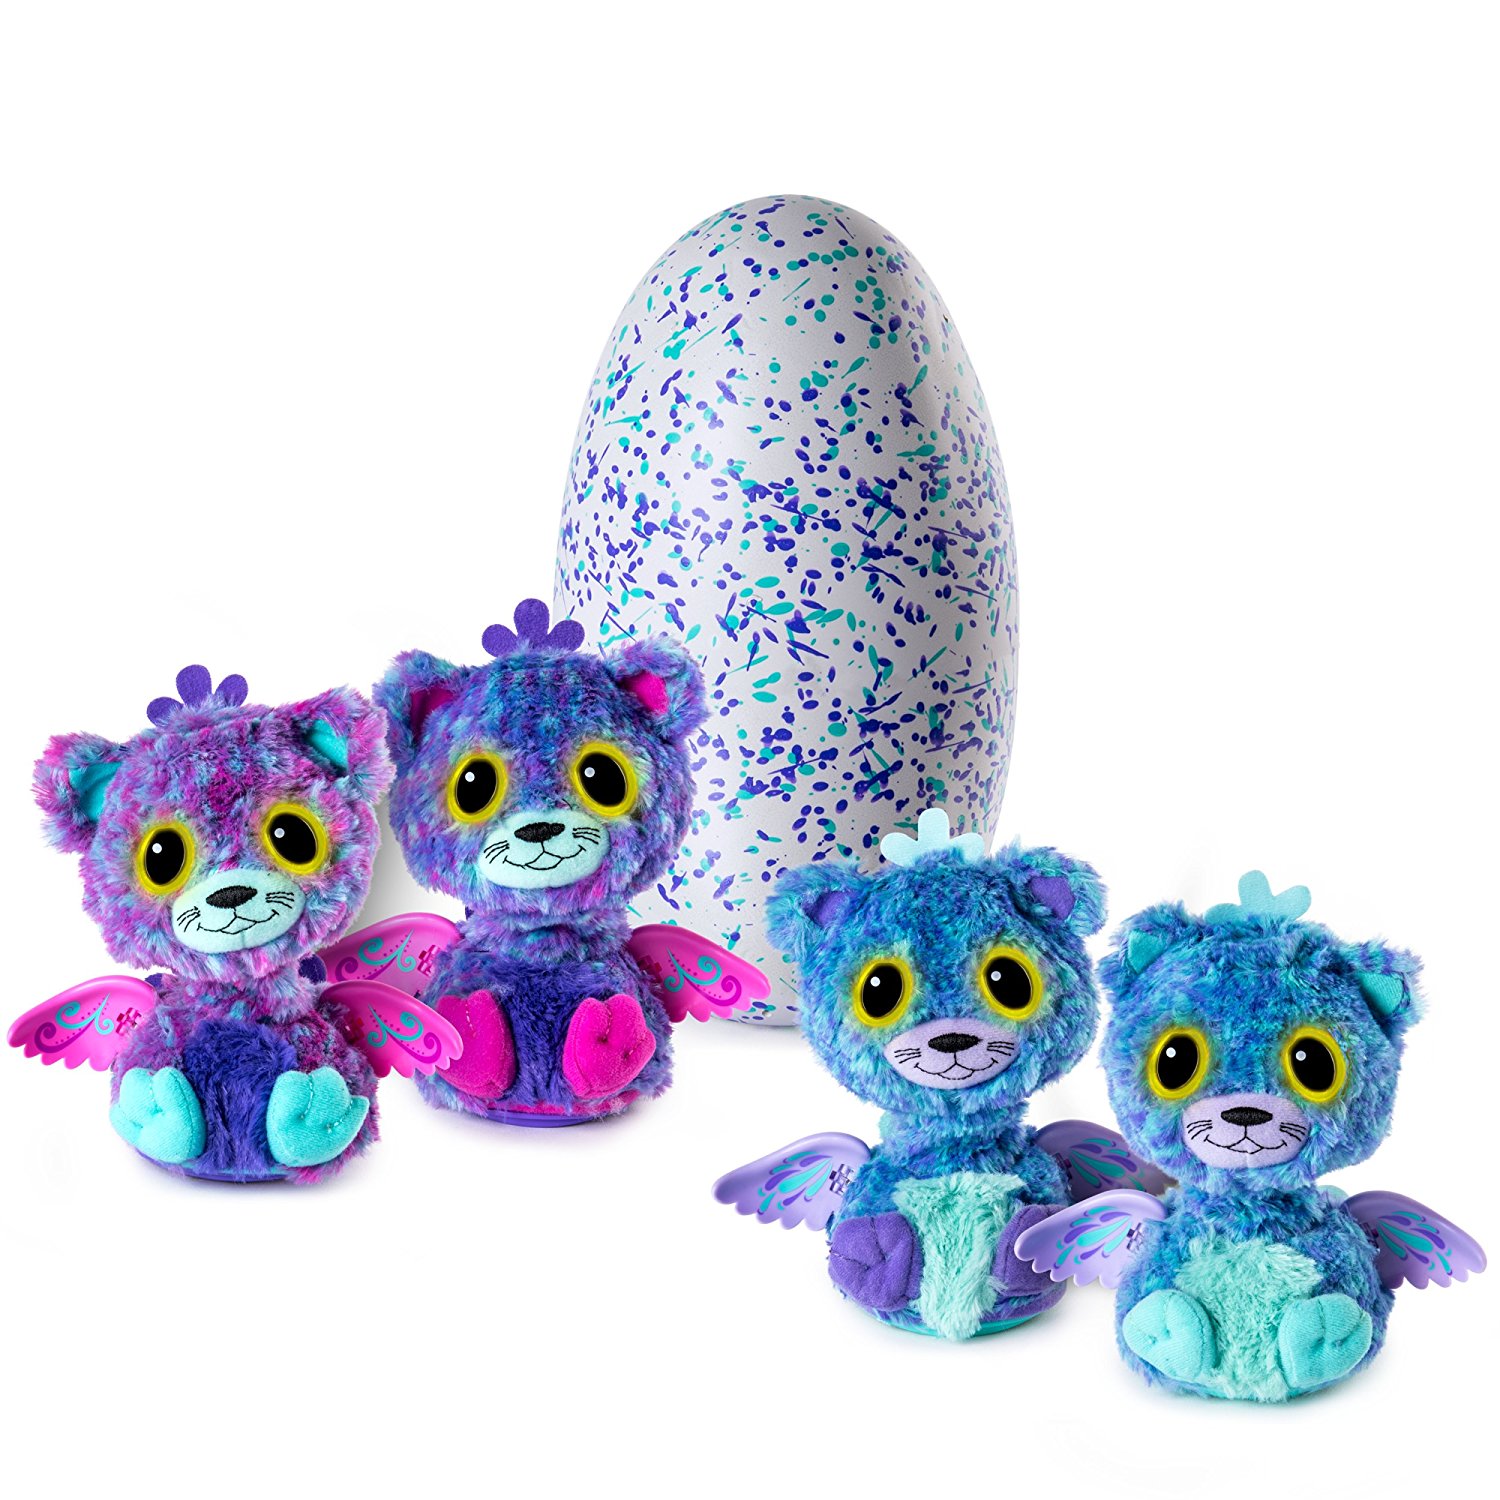 Amazon: Hatchimals Surprise (Peacat) Only $53.50 Shipped!